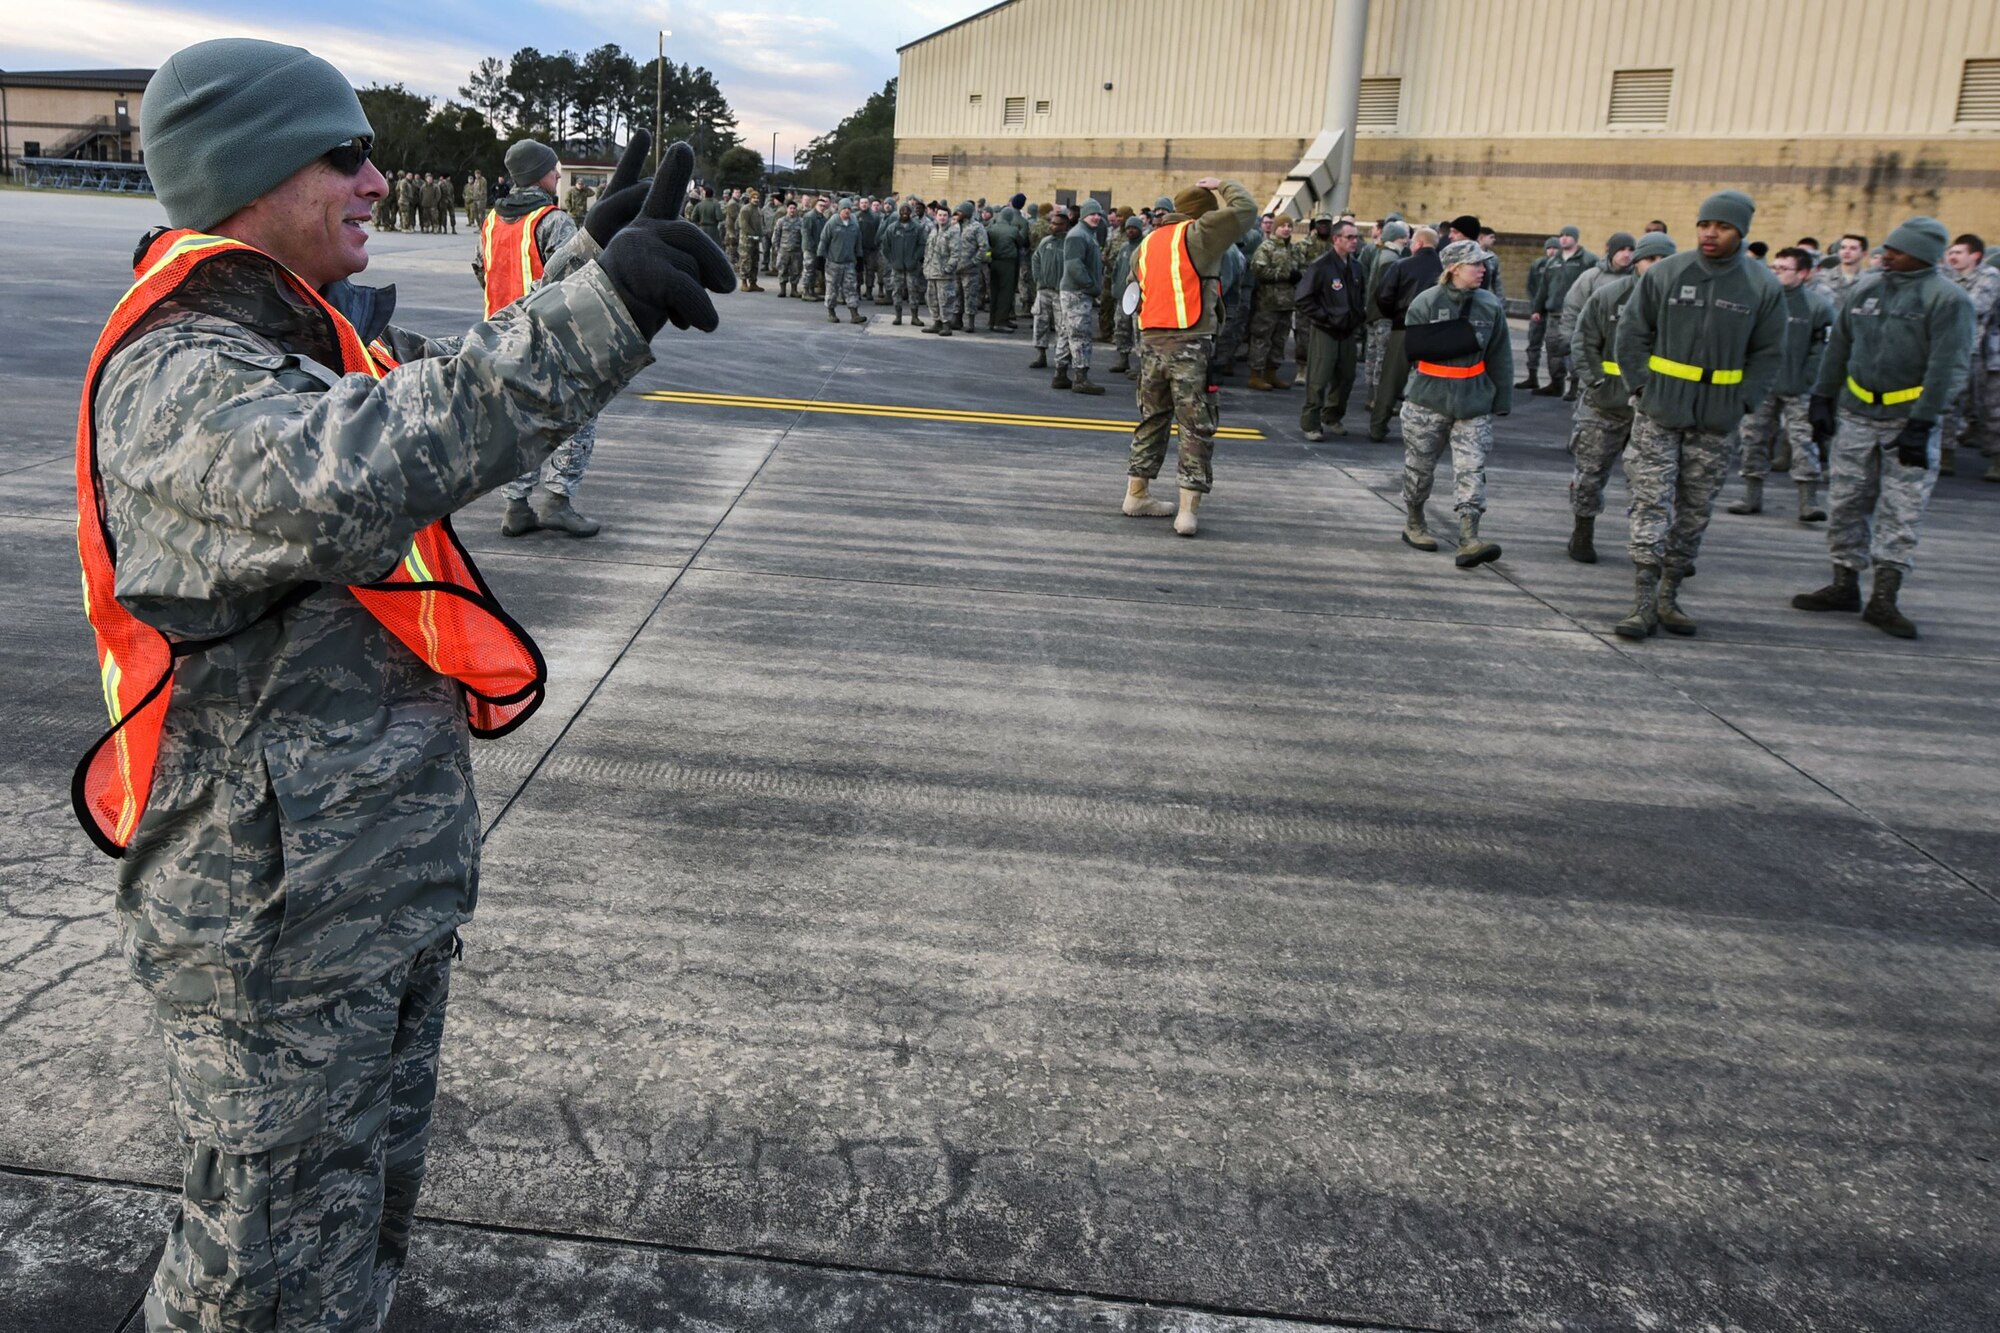 Tech Sgt. Christopher Edmonson, 23d Maintenance Group quality assurance inspector, signals Team Moody Airmen during a foreign object debris (FOD) walk, Jan. 2, 2018, at Moody Air Force Base, Ga. The FOD walk was performed following the winter holidays to remove any debris that could potentially cause damage to aircraft or vehicles. (U.S. Air Force photo by Airman Eugene Oliver)